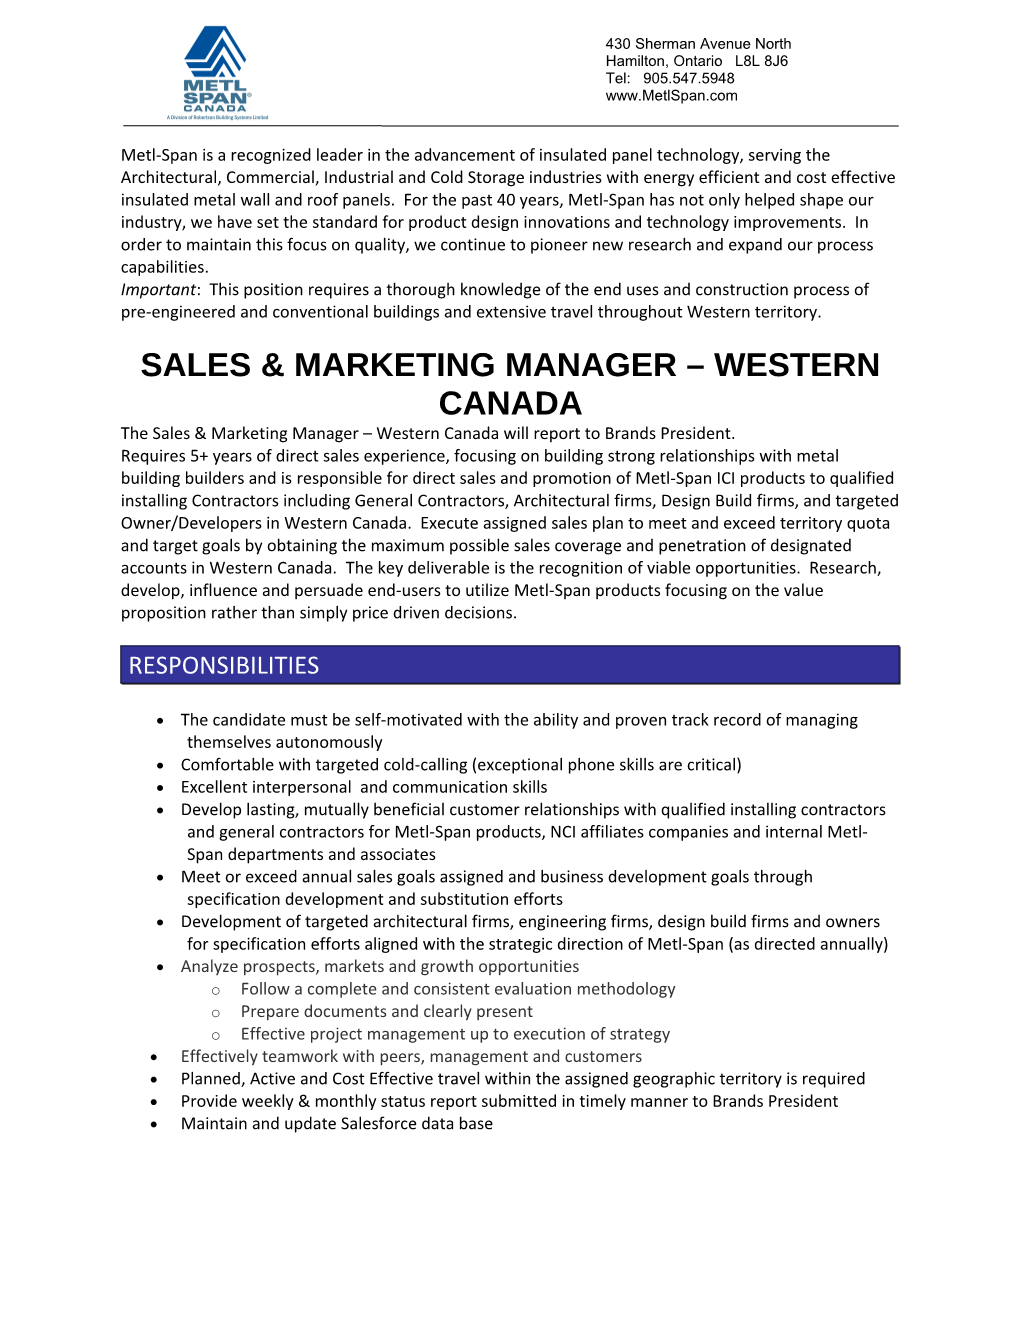 Sales & Marketing Manager Western Canada